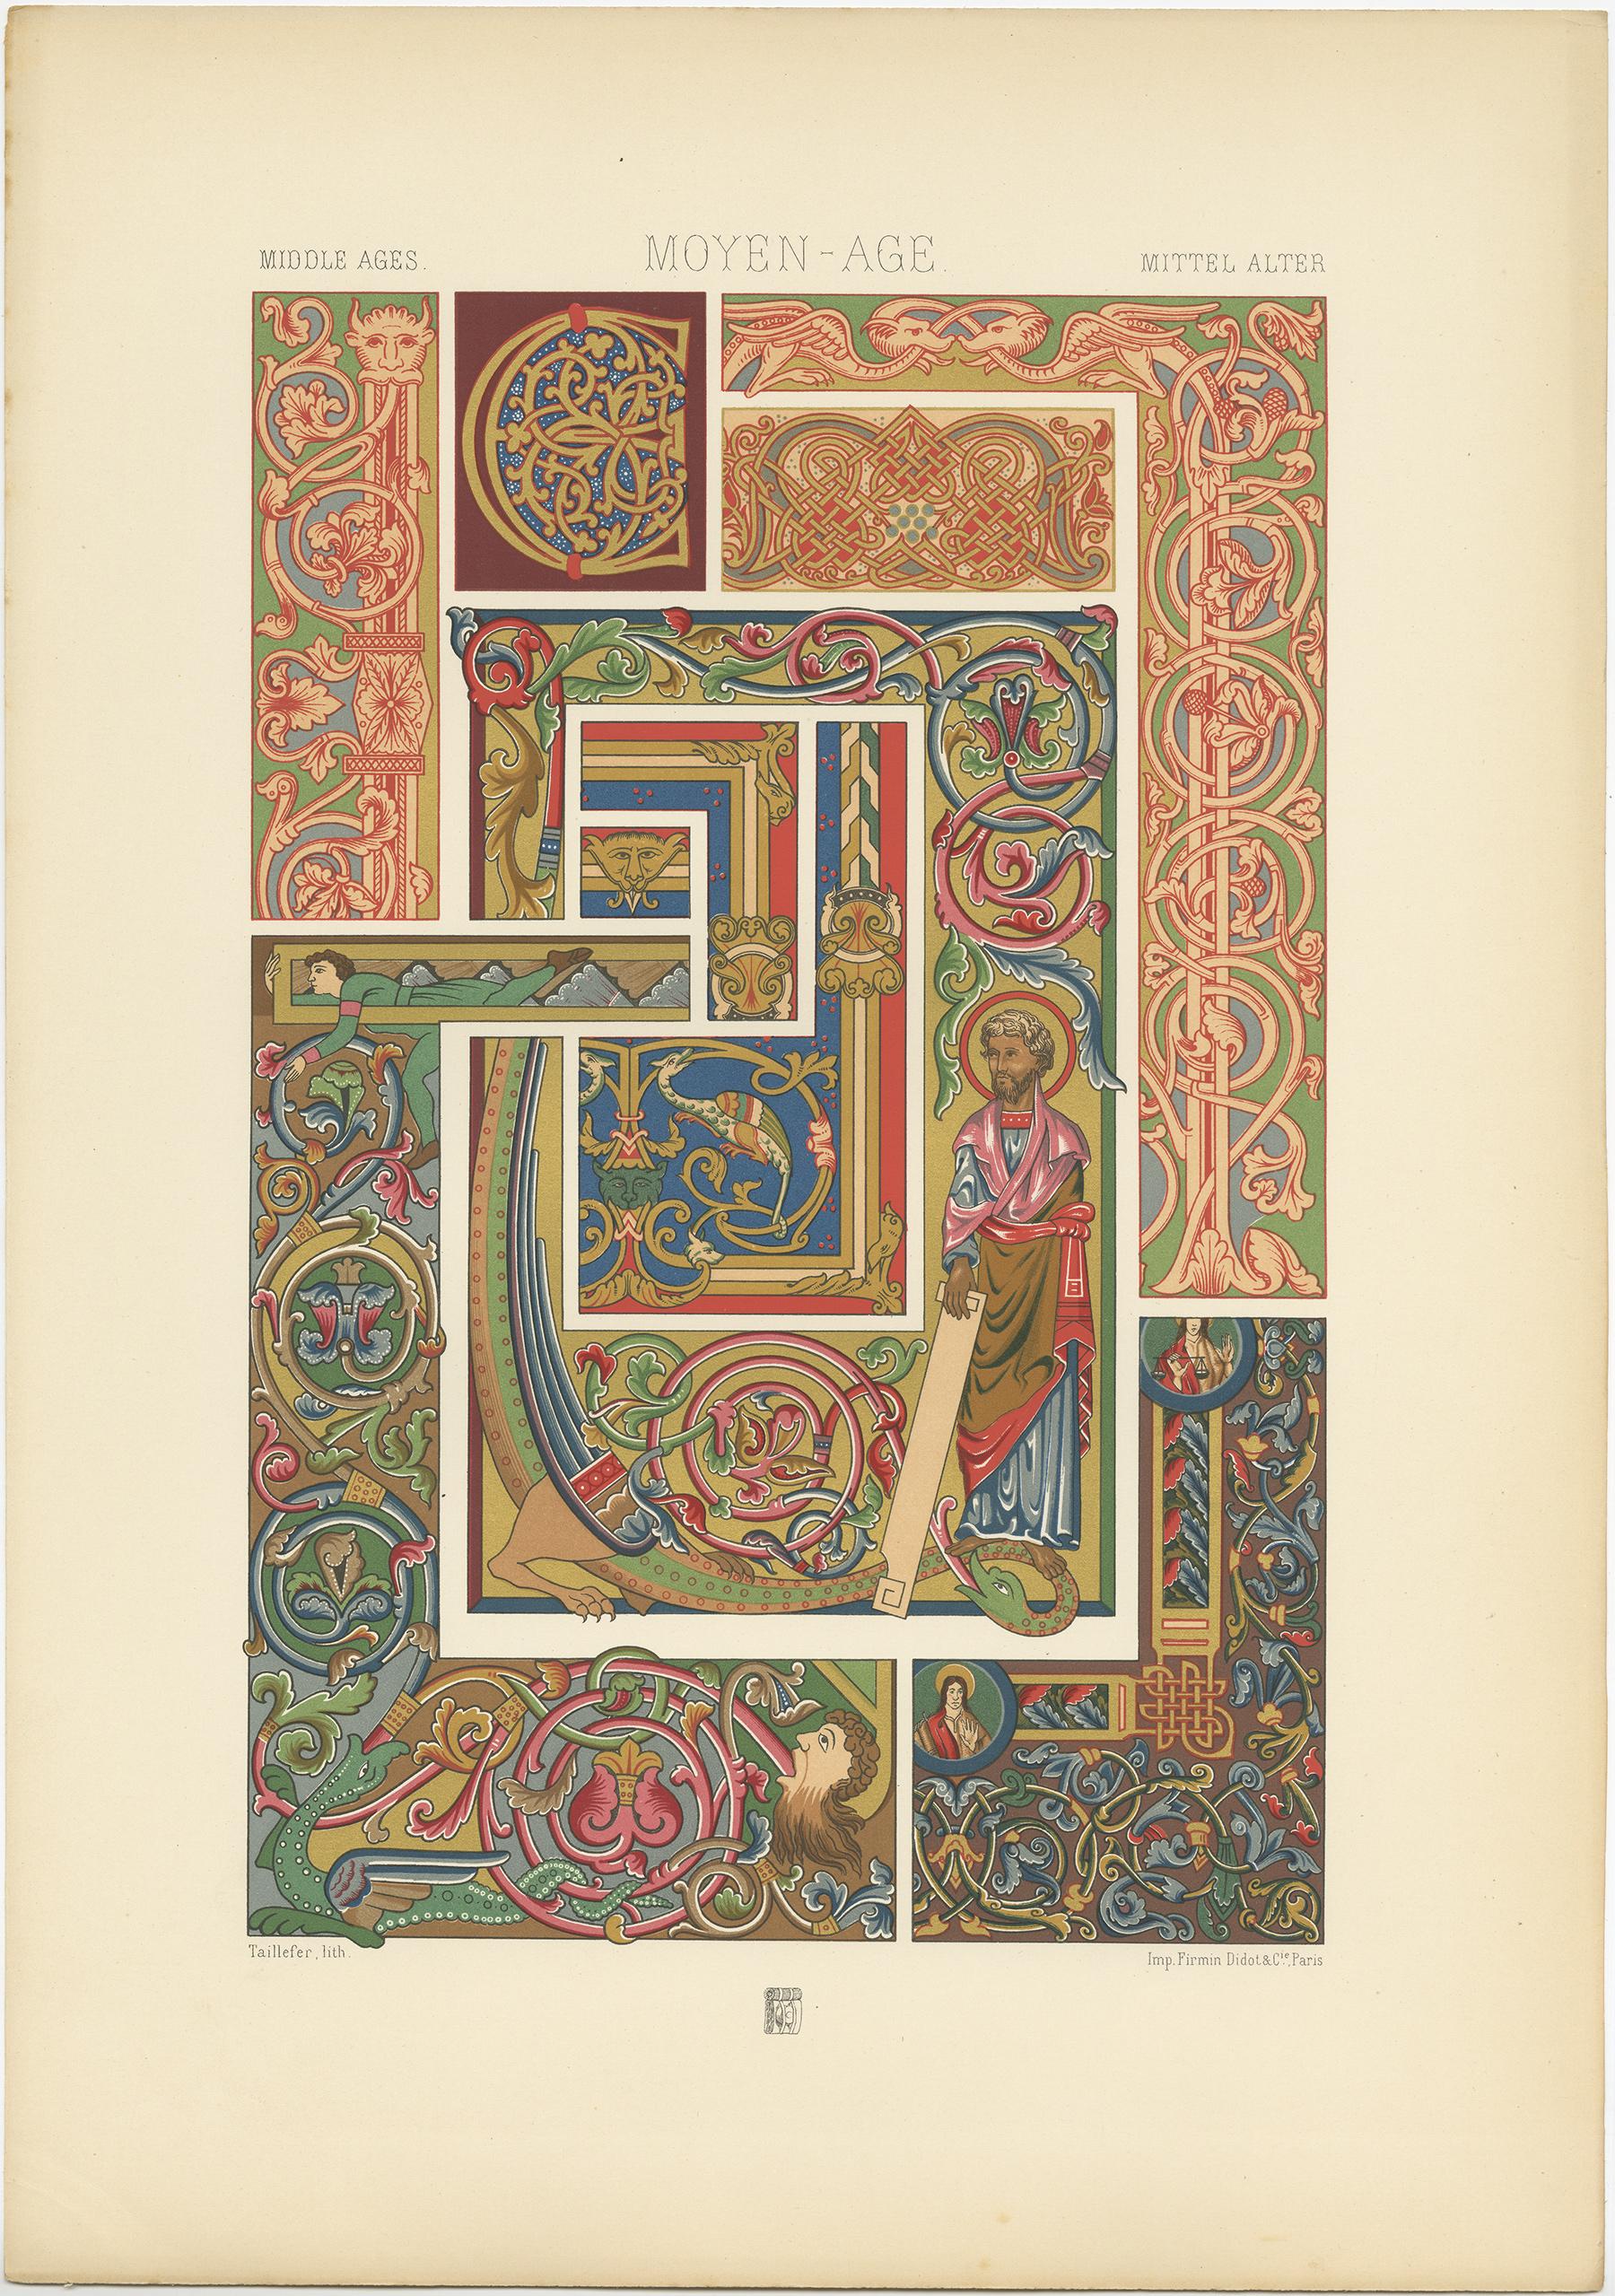 Antique print titled 'Middle Ages - Moyen Age - Mittel Alter'. Chromolithograph of manuscripts decoration, France and Germany, 8th-13th centuries
ornaments. This print originates from 'l'Ornement Polychrome' by Auguste Racinet. Published circa 1890.